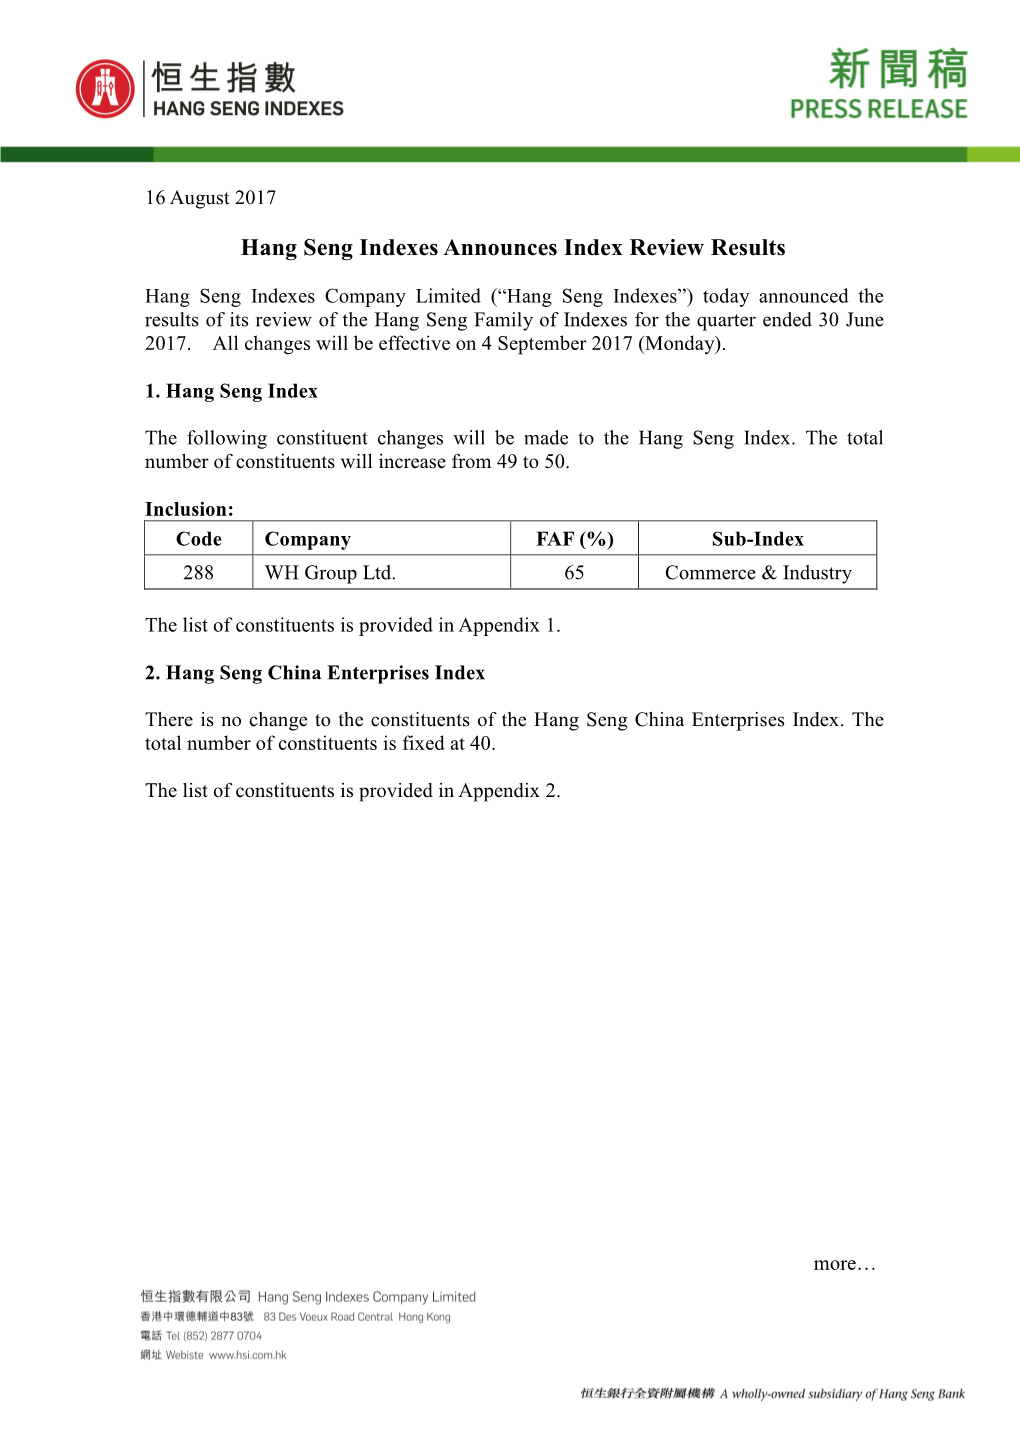 Hang Seng Indexes Announces Index Review Results